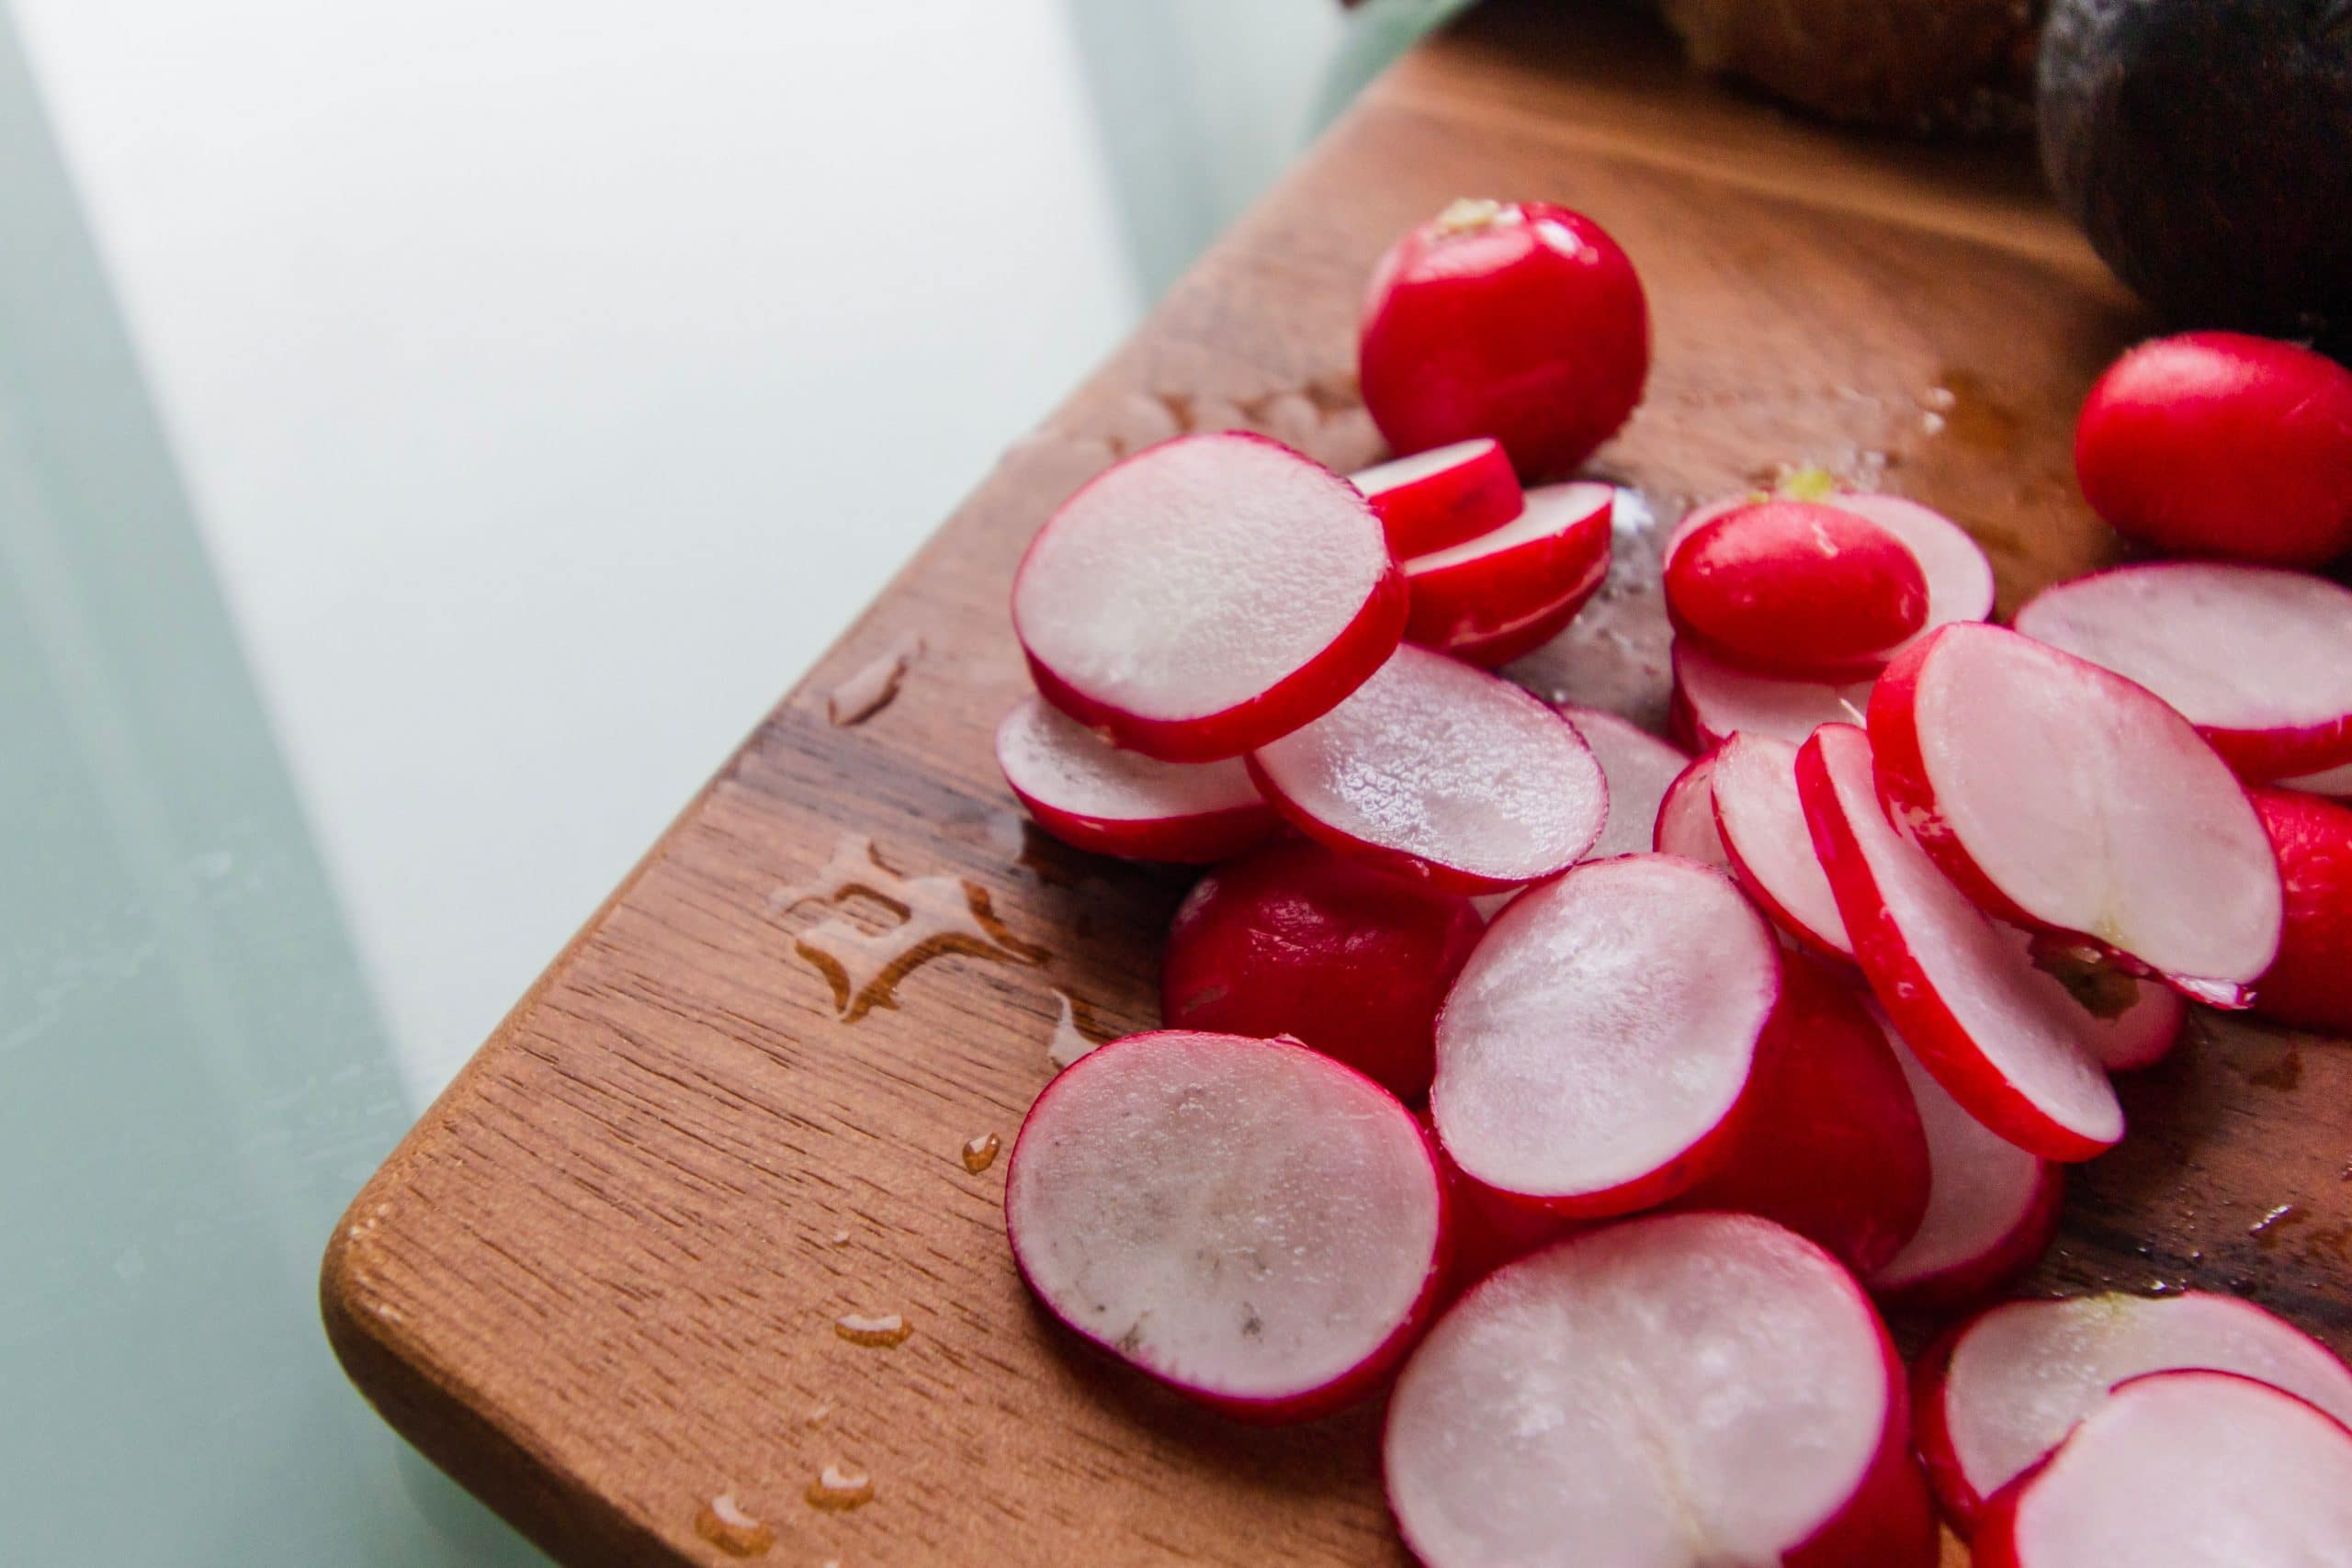 How to store sliced radishes